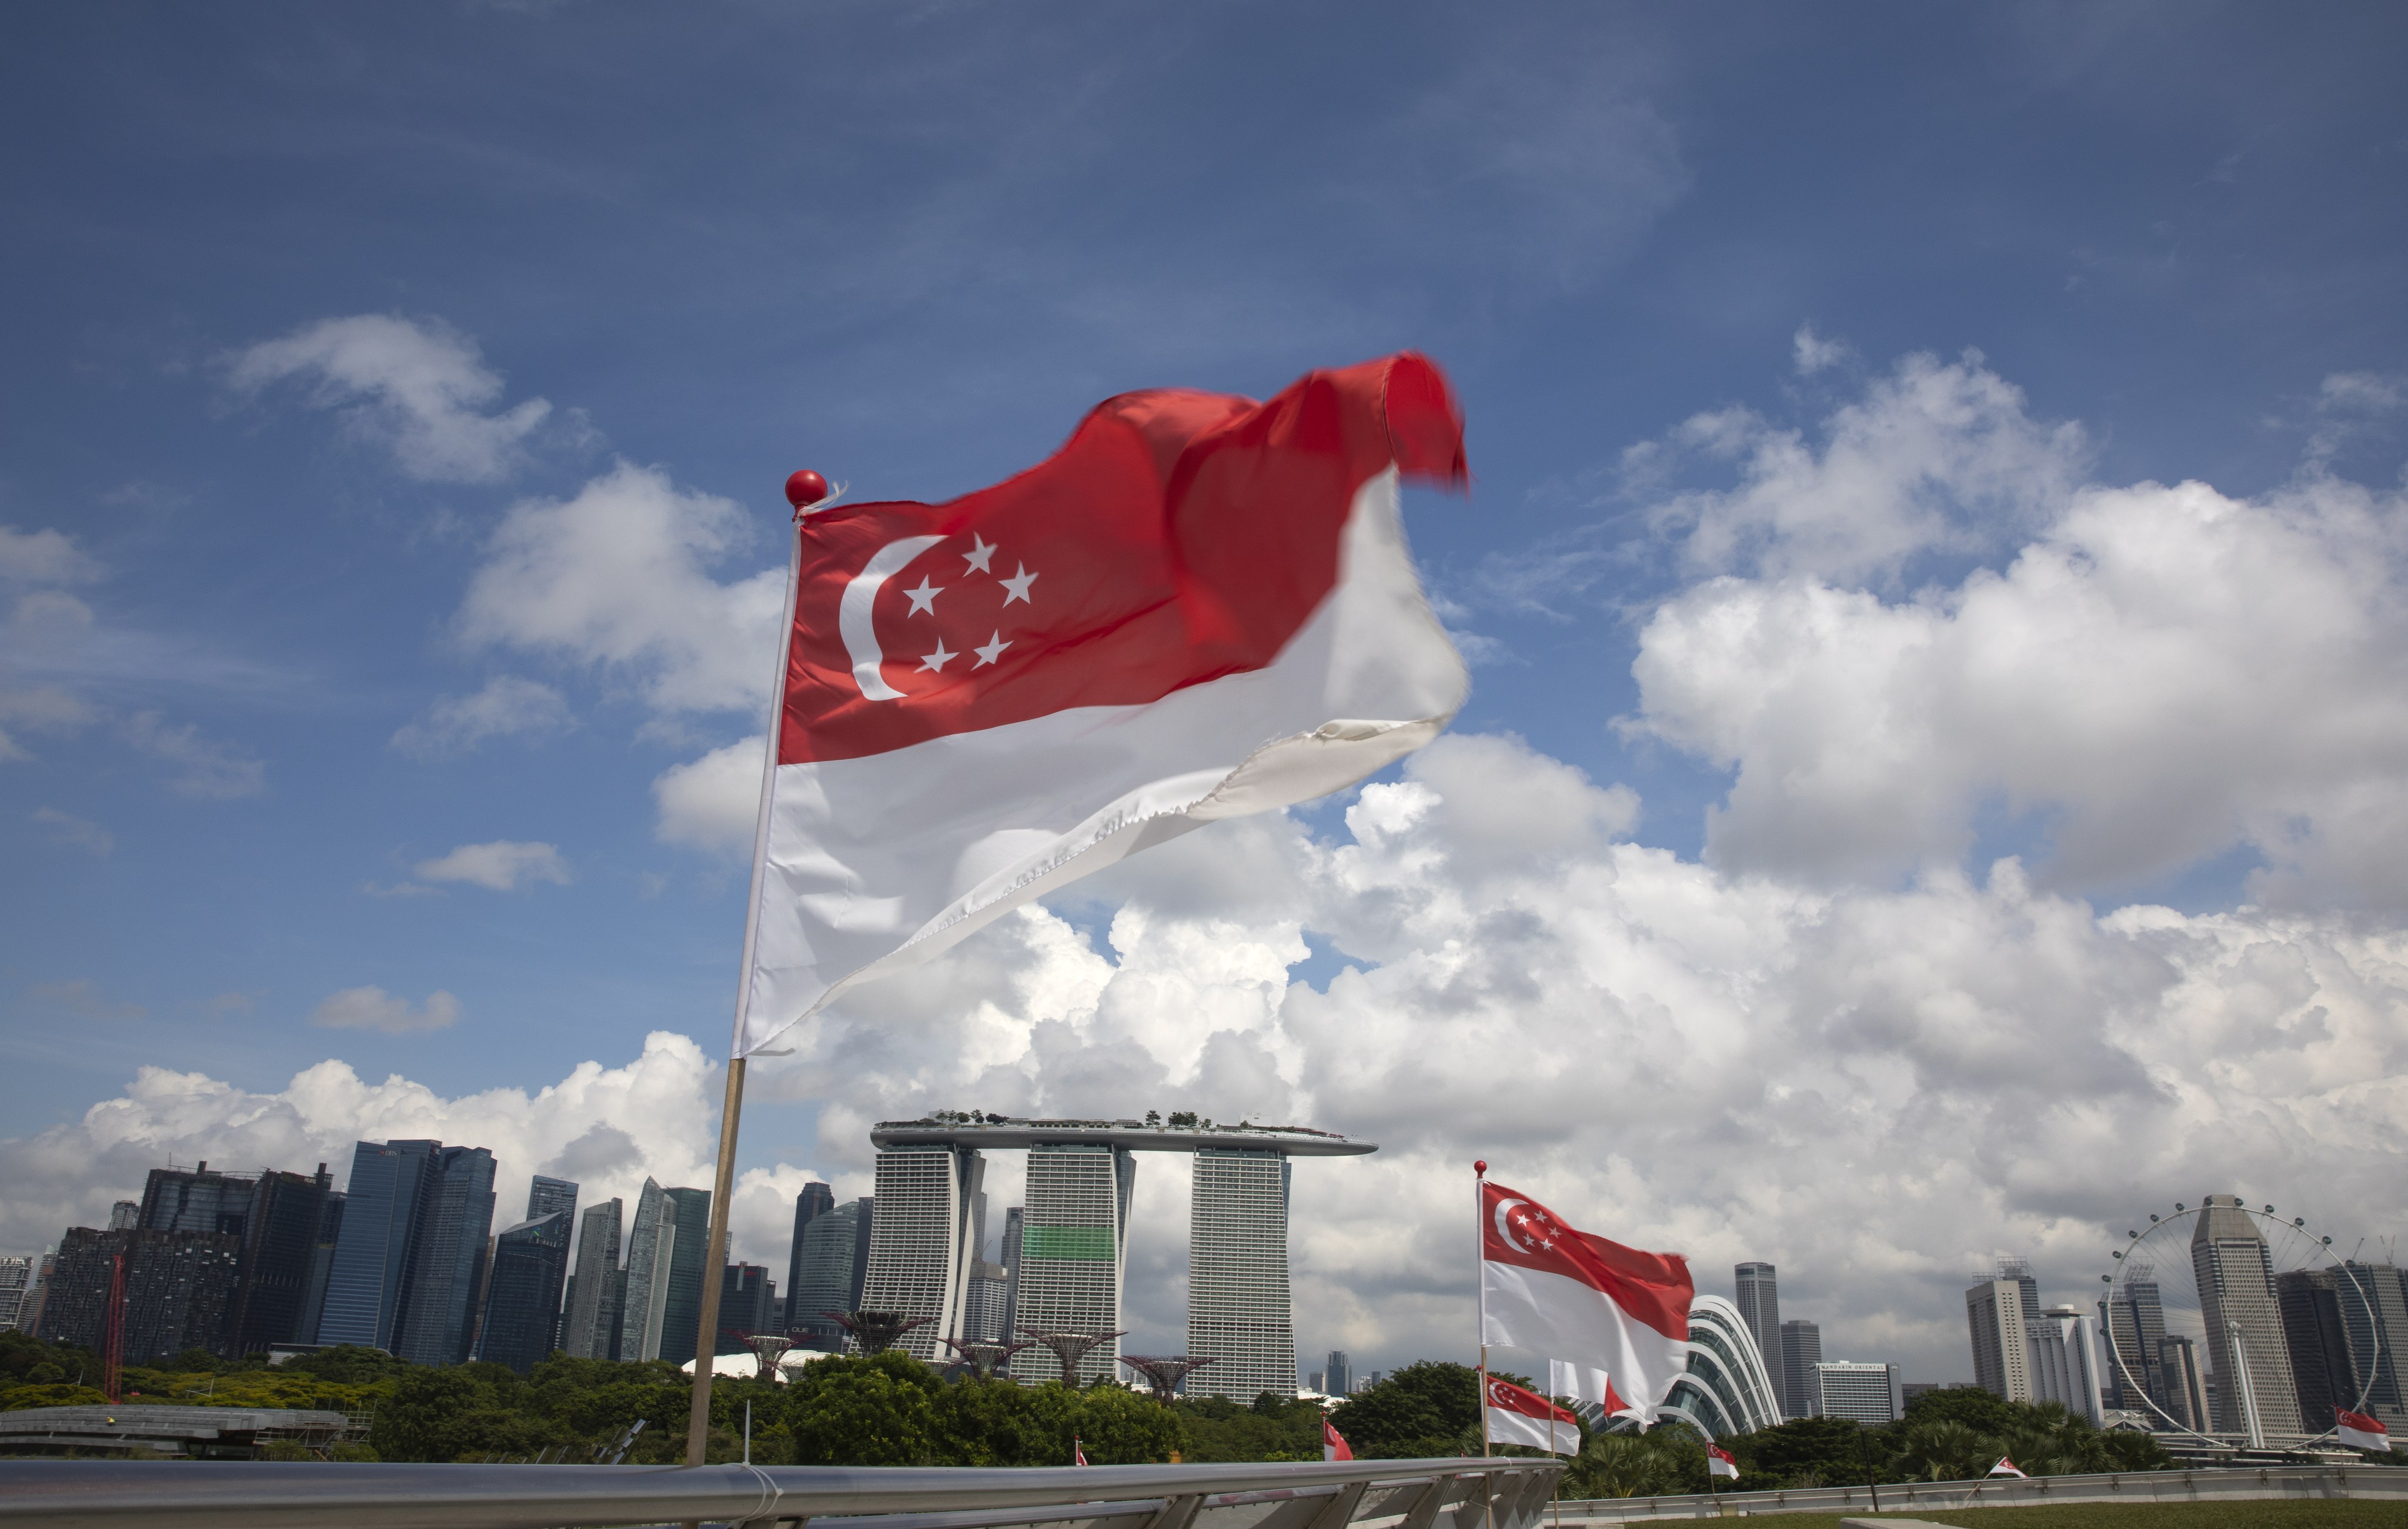 Singapore national flags flutter over a view of the city skyline in August last year, the same month the incident occurred. Photo: EPA-EFE